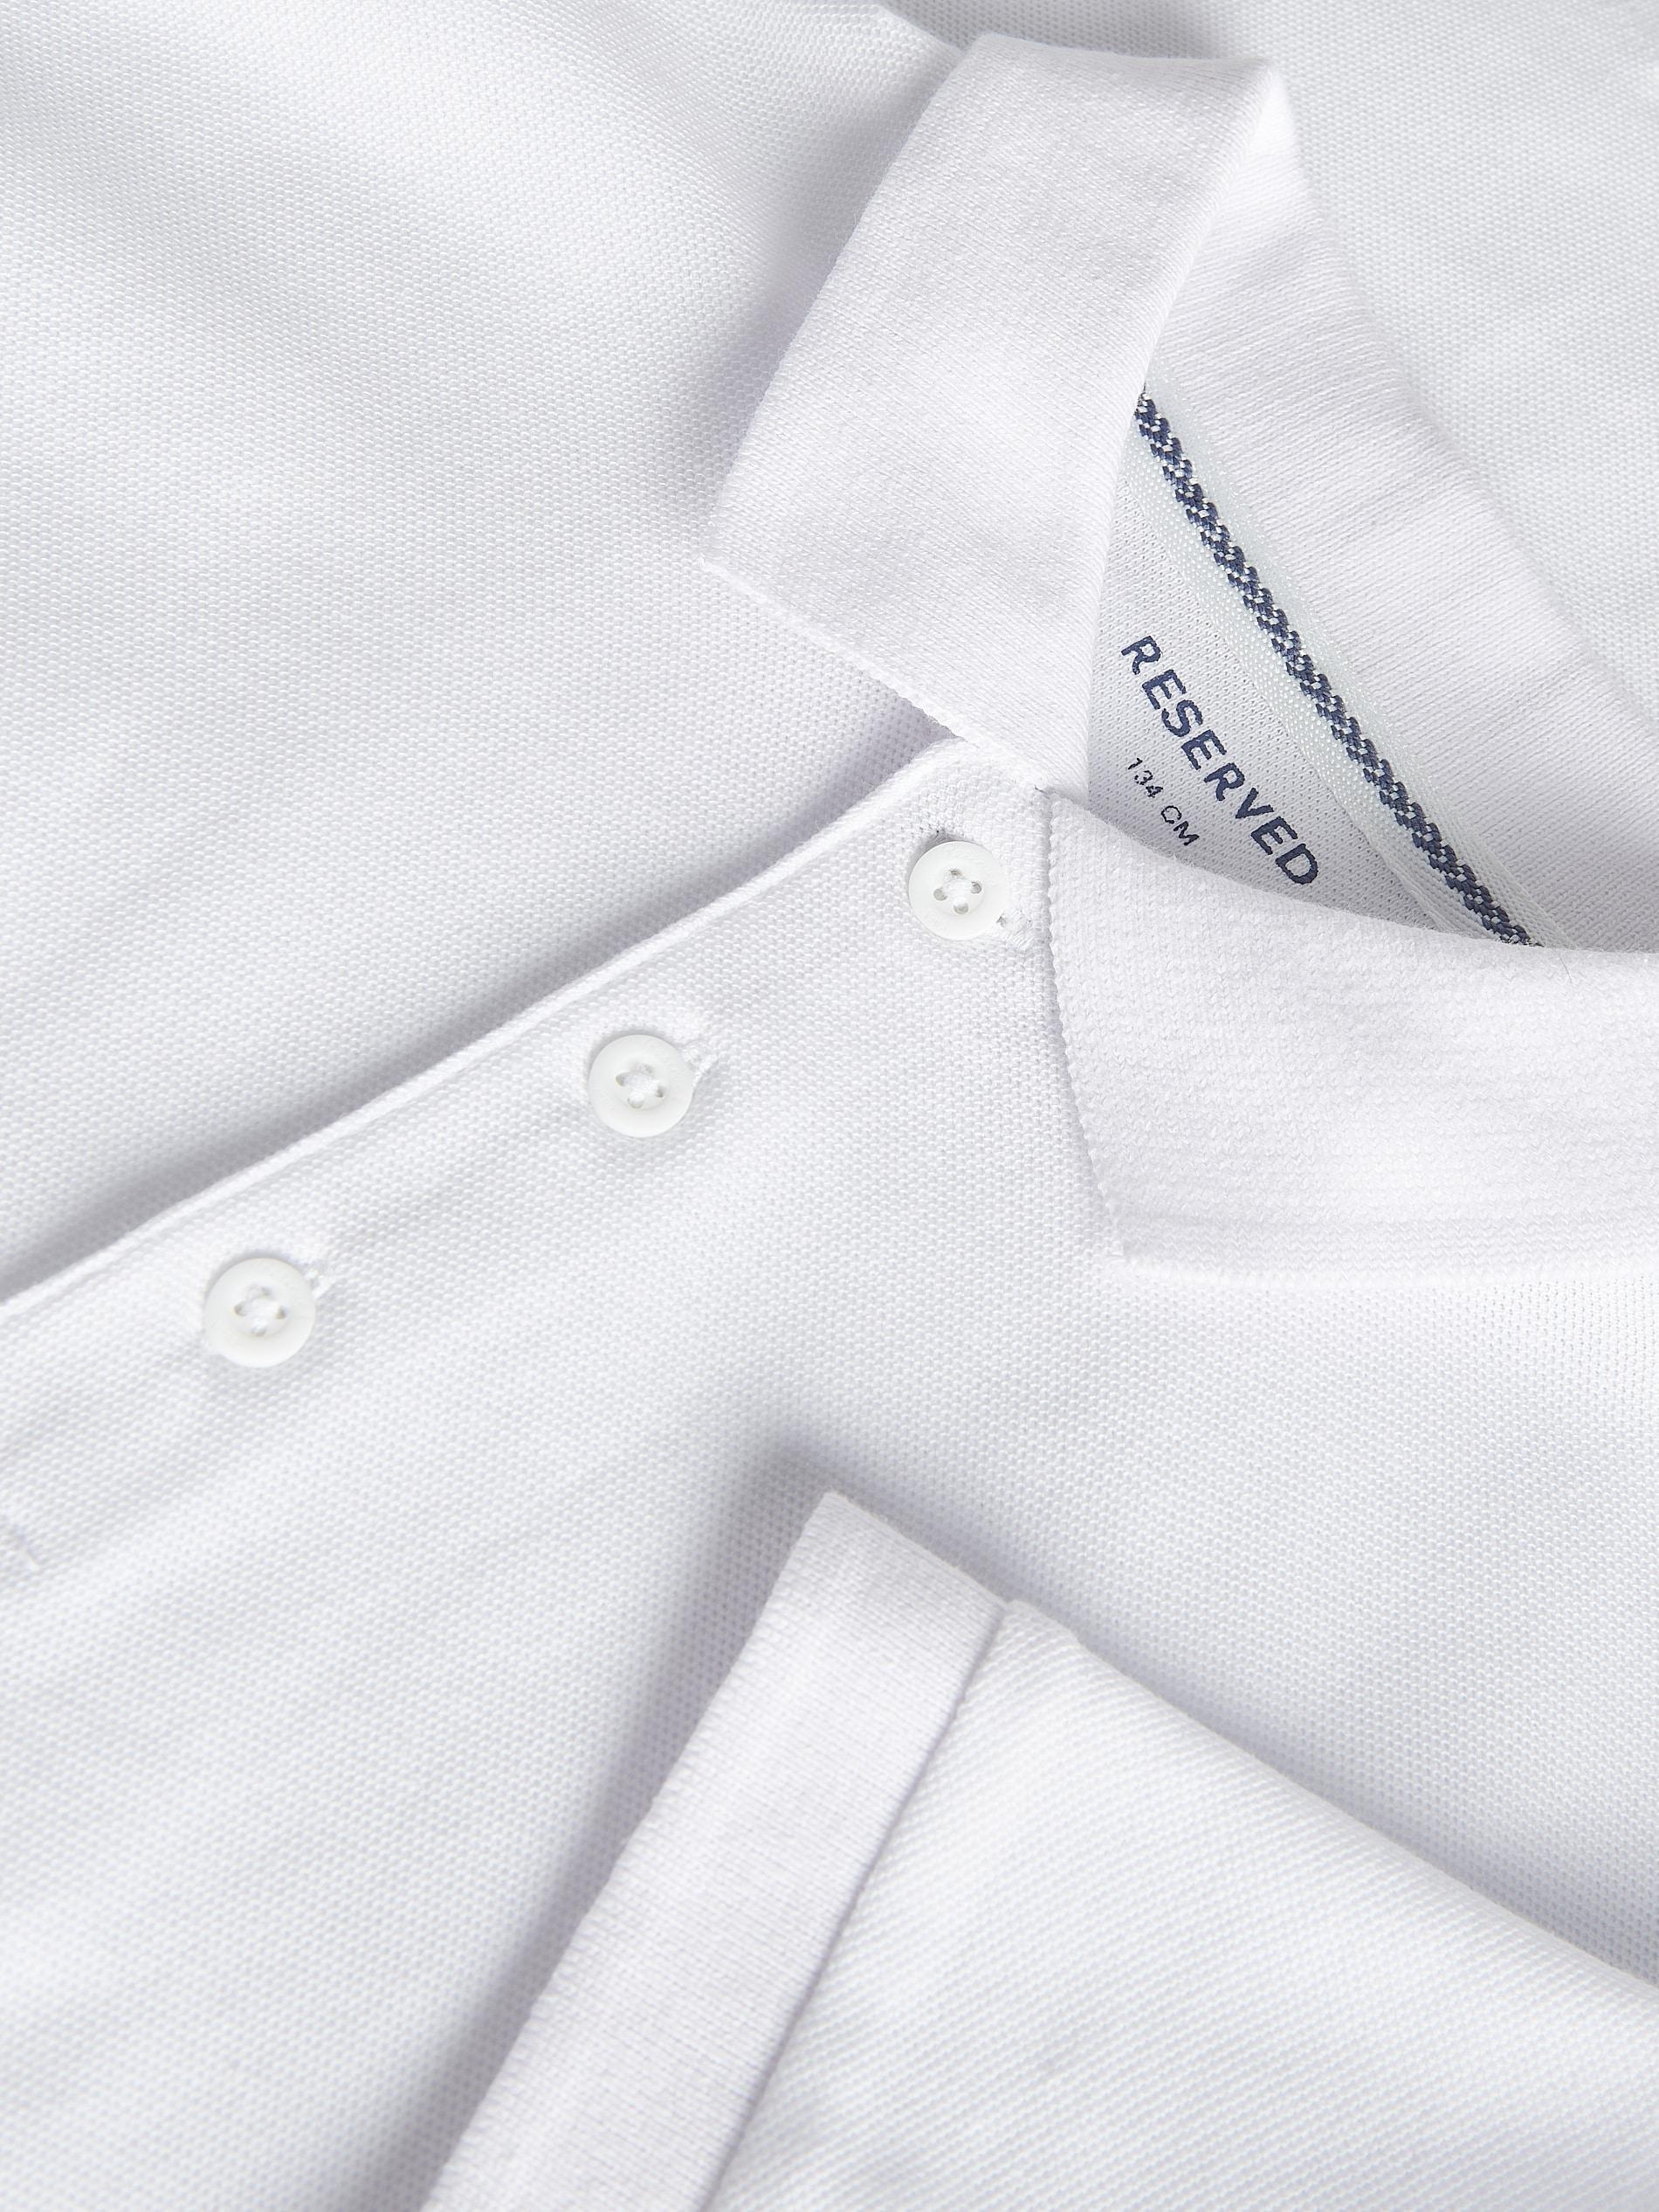 Reserved - White Polo T-Shirt, Kids Boys